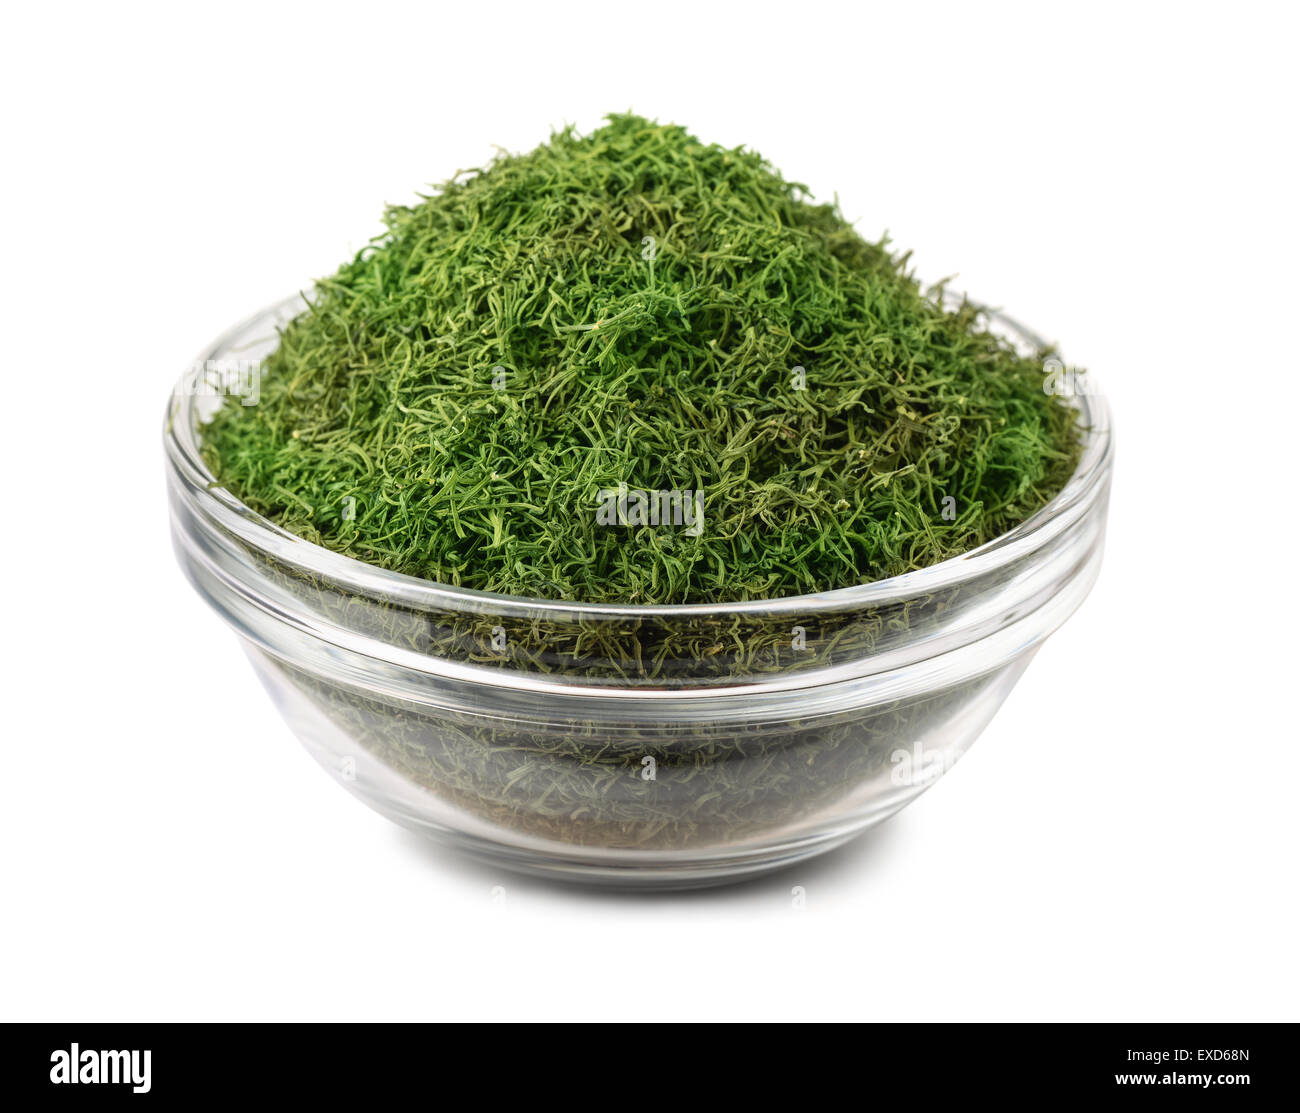 Bowl of dried dill weed isolated on white Stock Photo